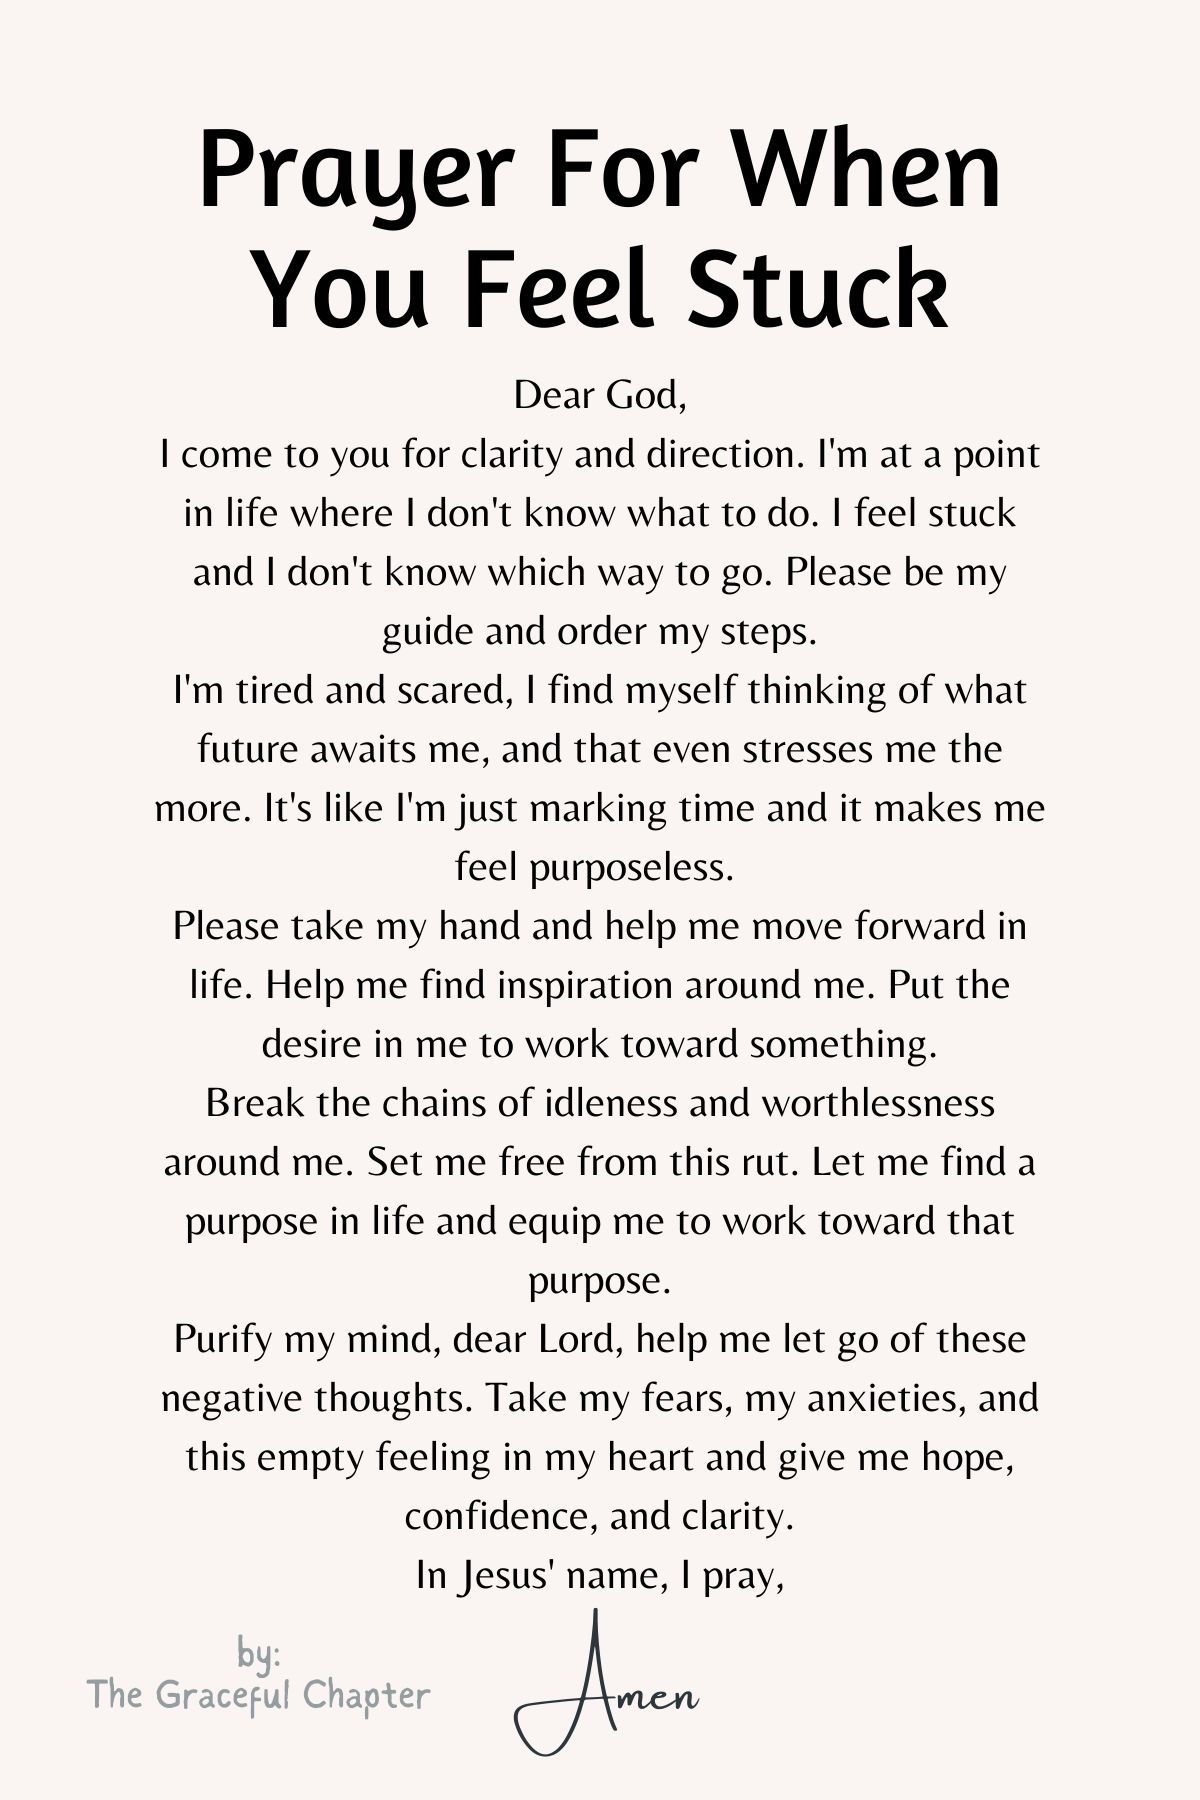 Prayer for when you feel stuck